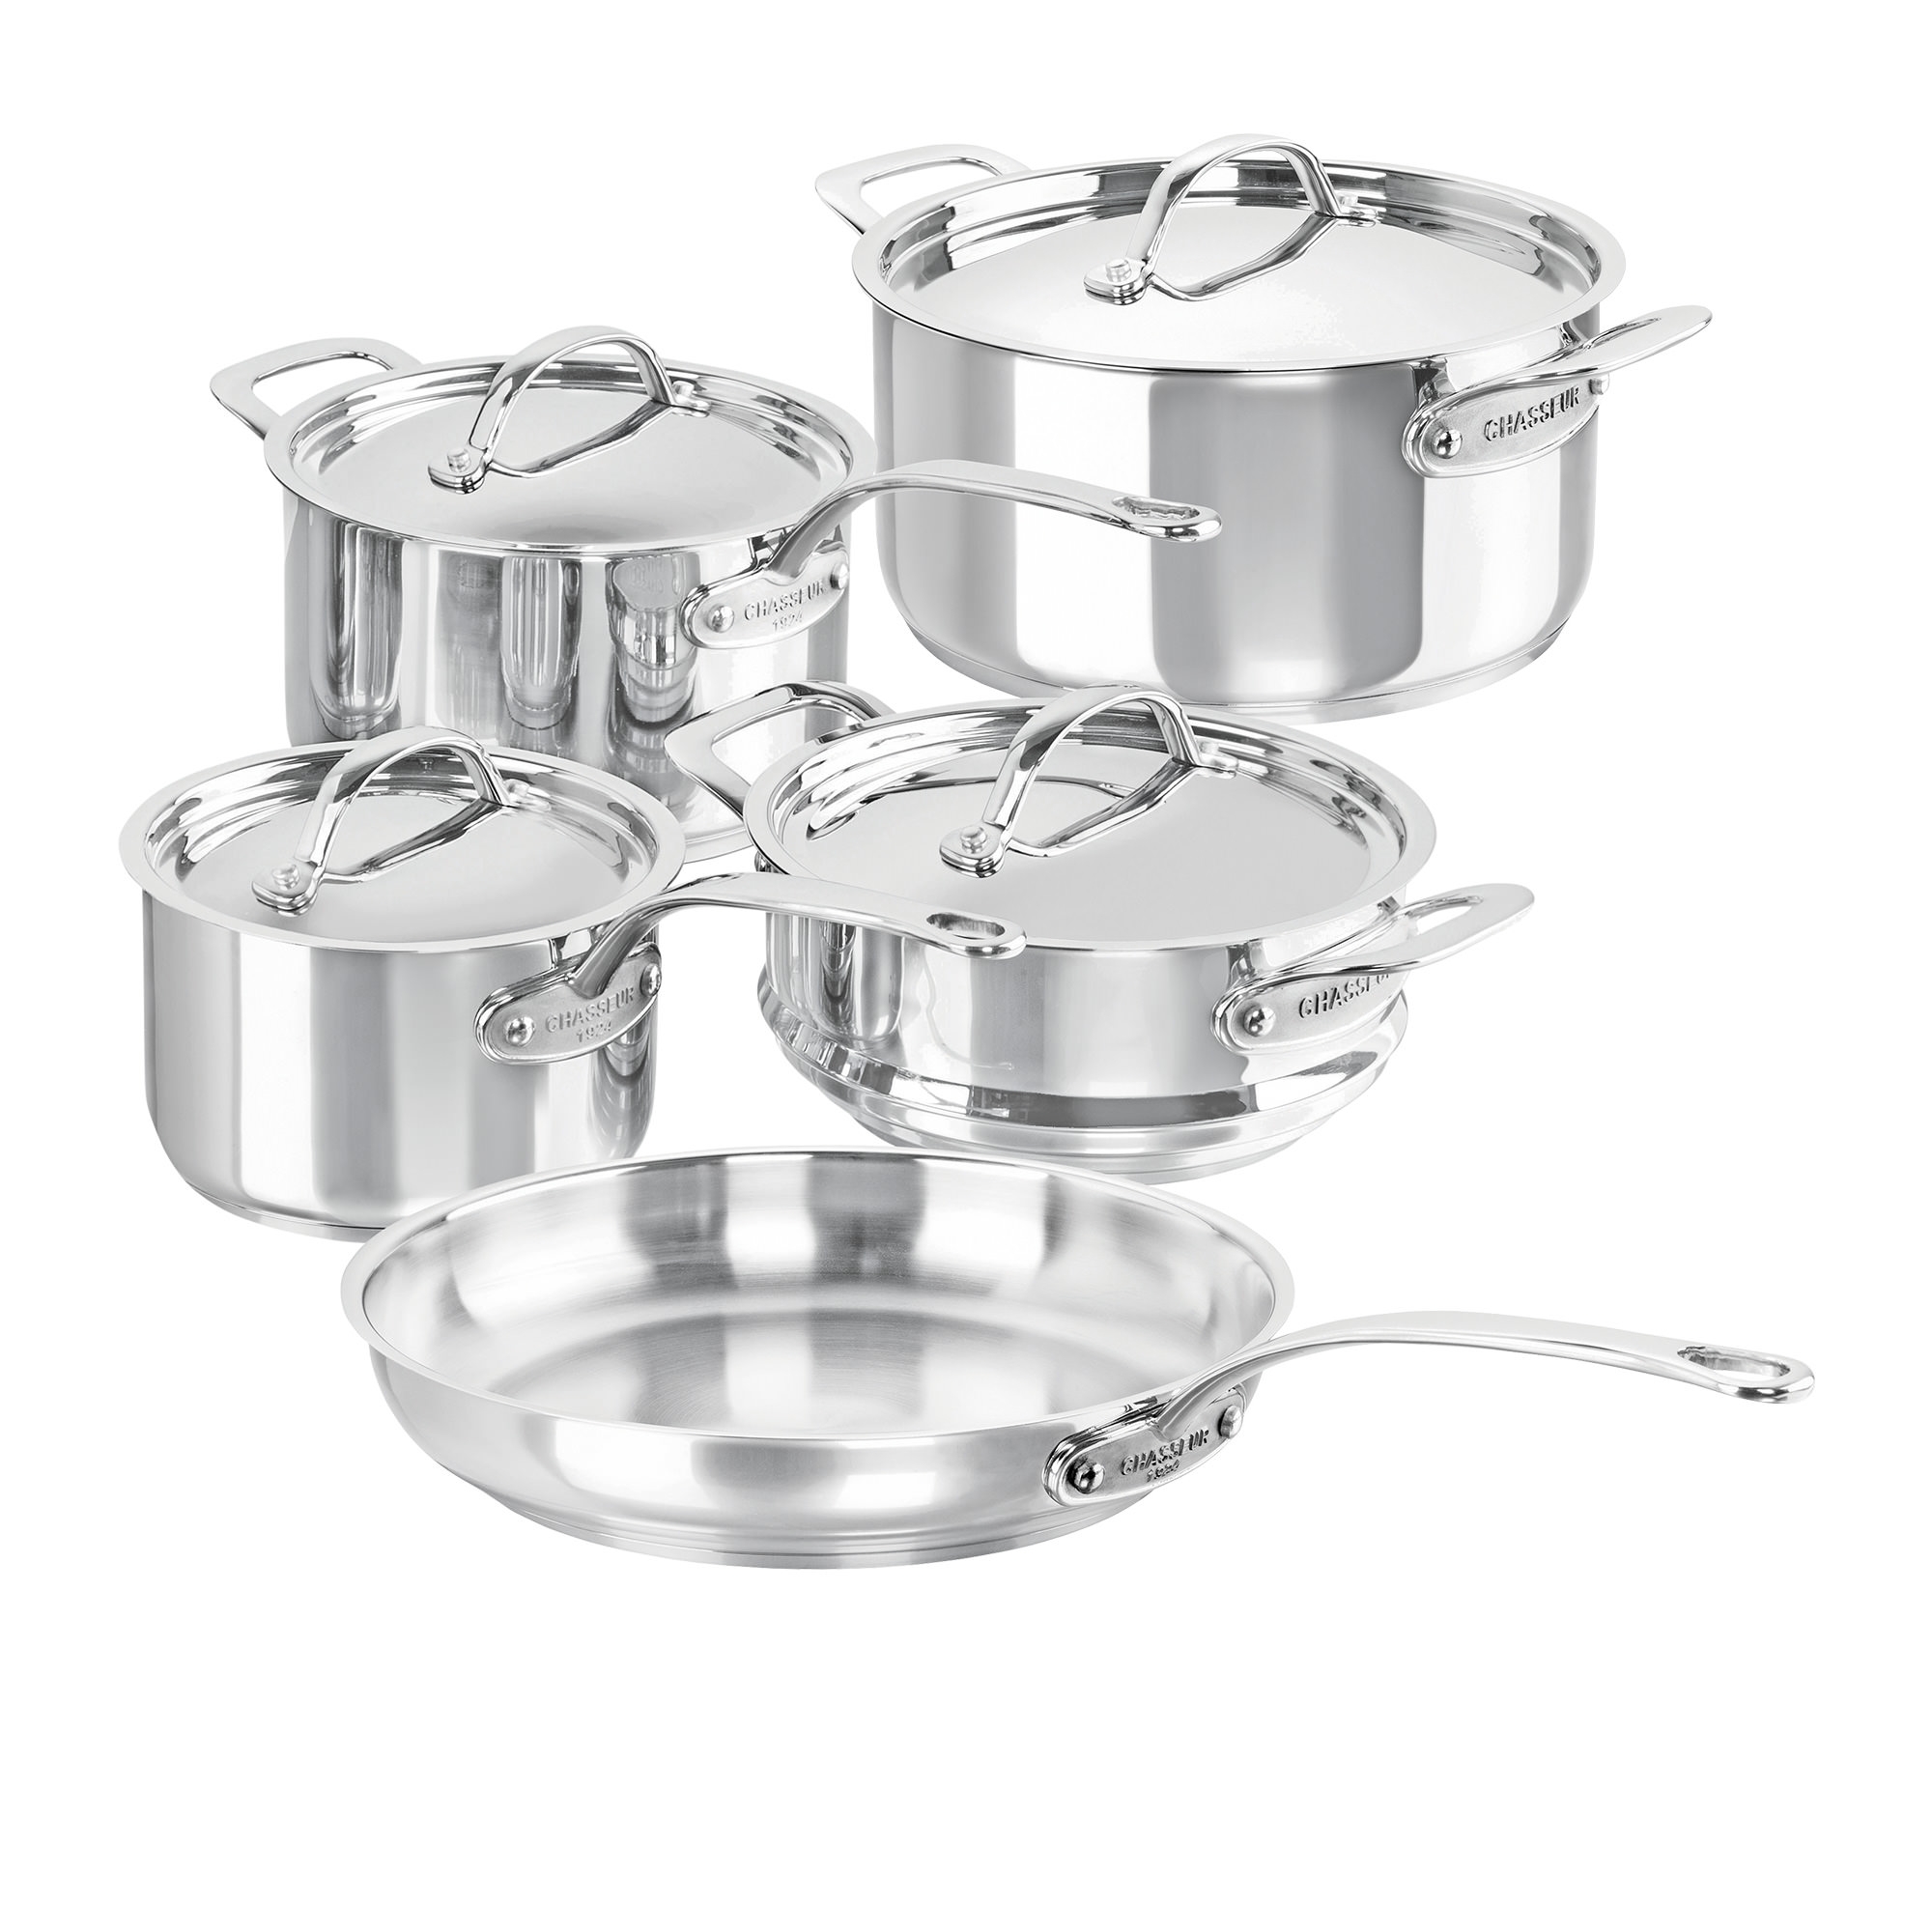 Chasseur Maison 5pc Stainless Steel Cookware Set Image 1